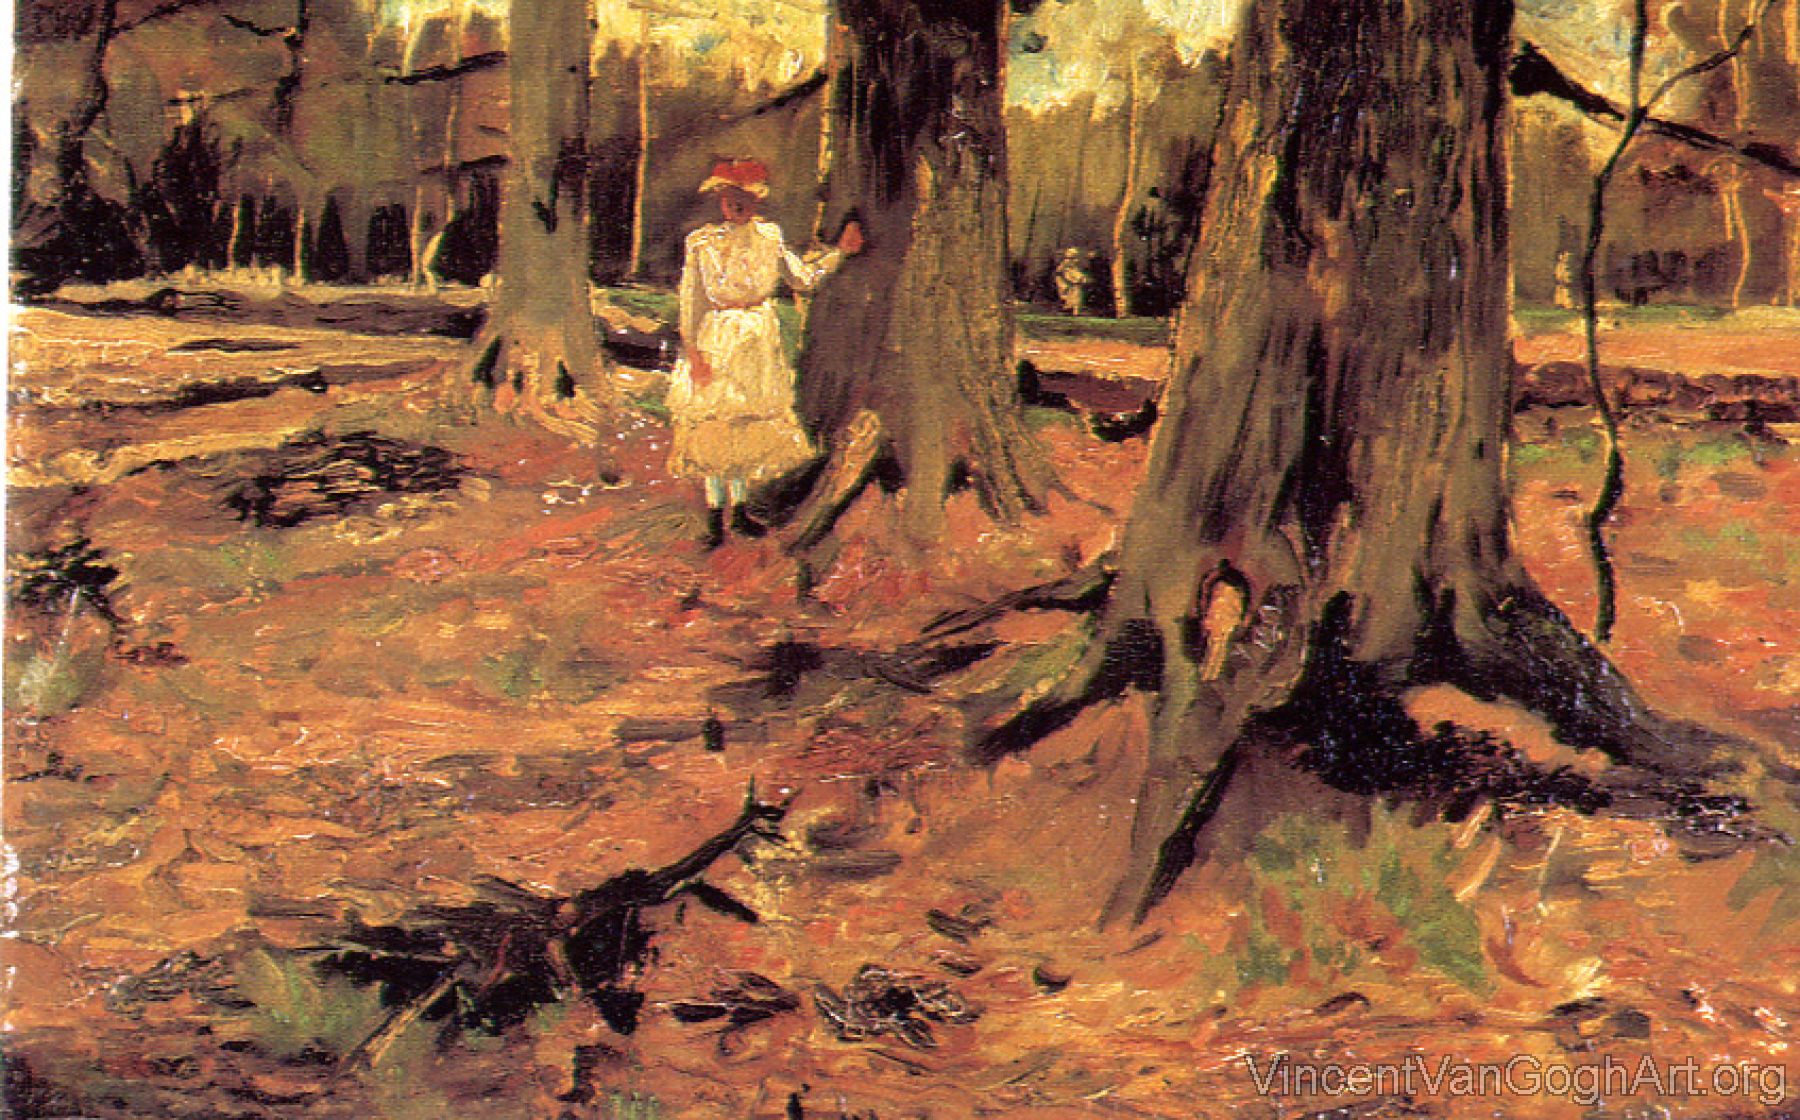 A girl in a wood